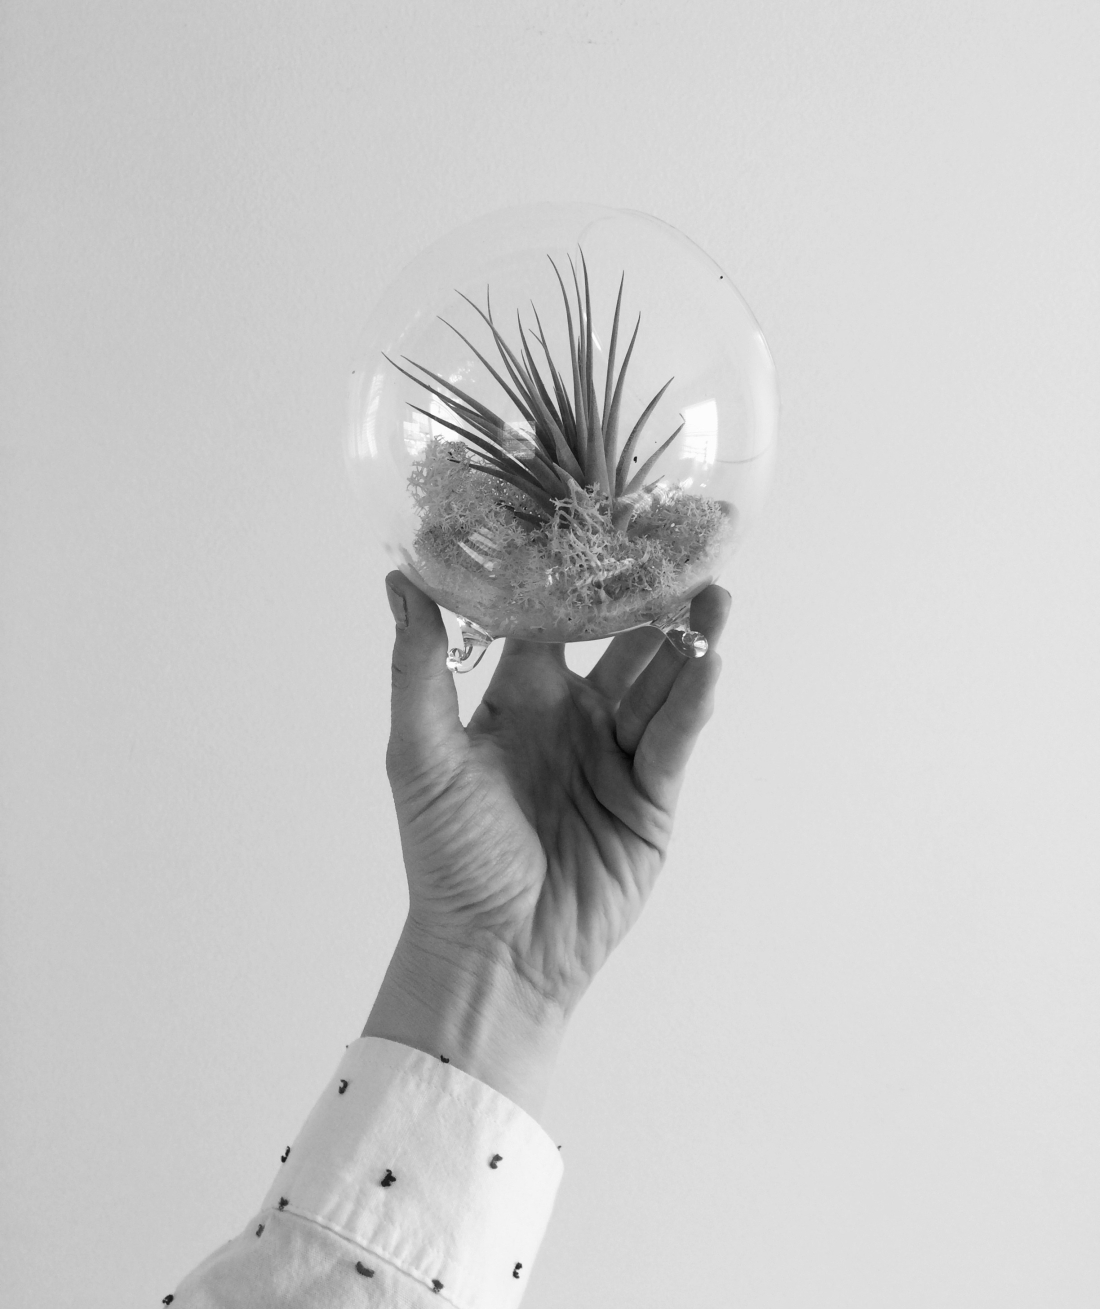 Woman's hand with polka dot sleeve holding a glass circle with an air plant in it. Black and white photograph. Plain gray background.